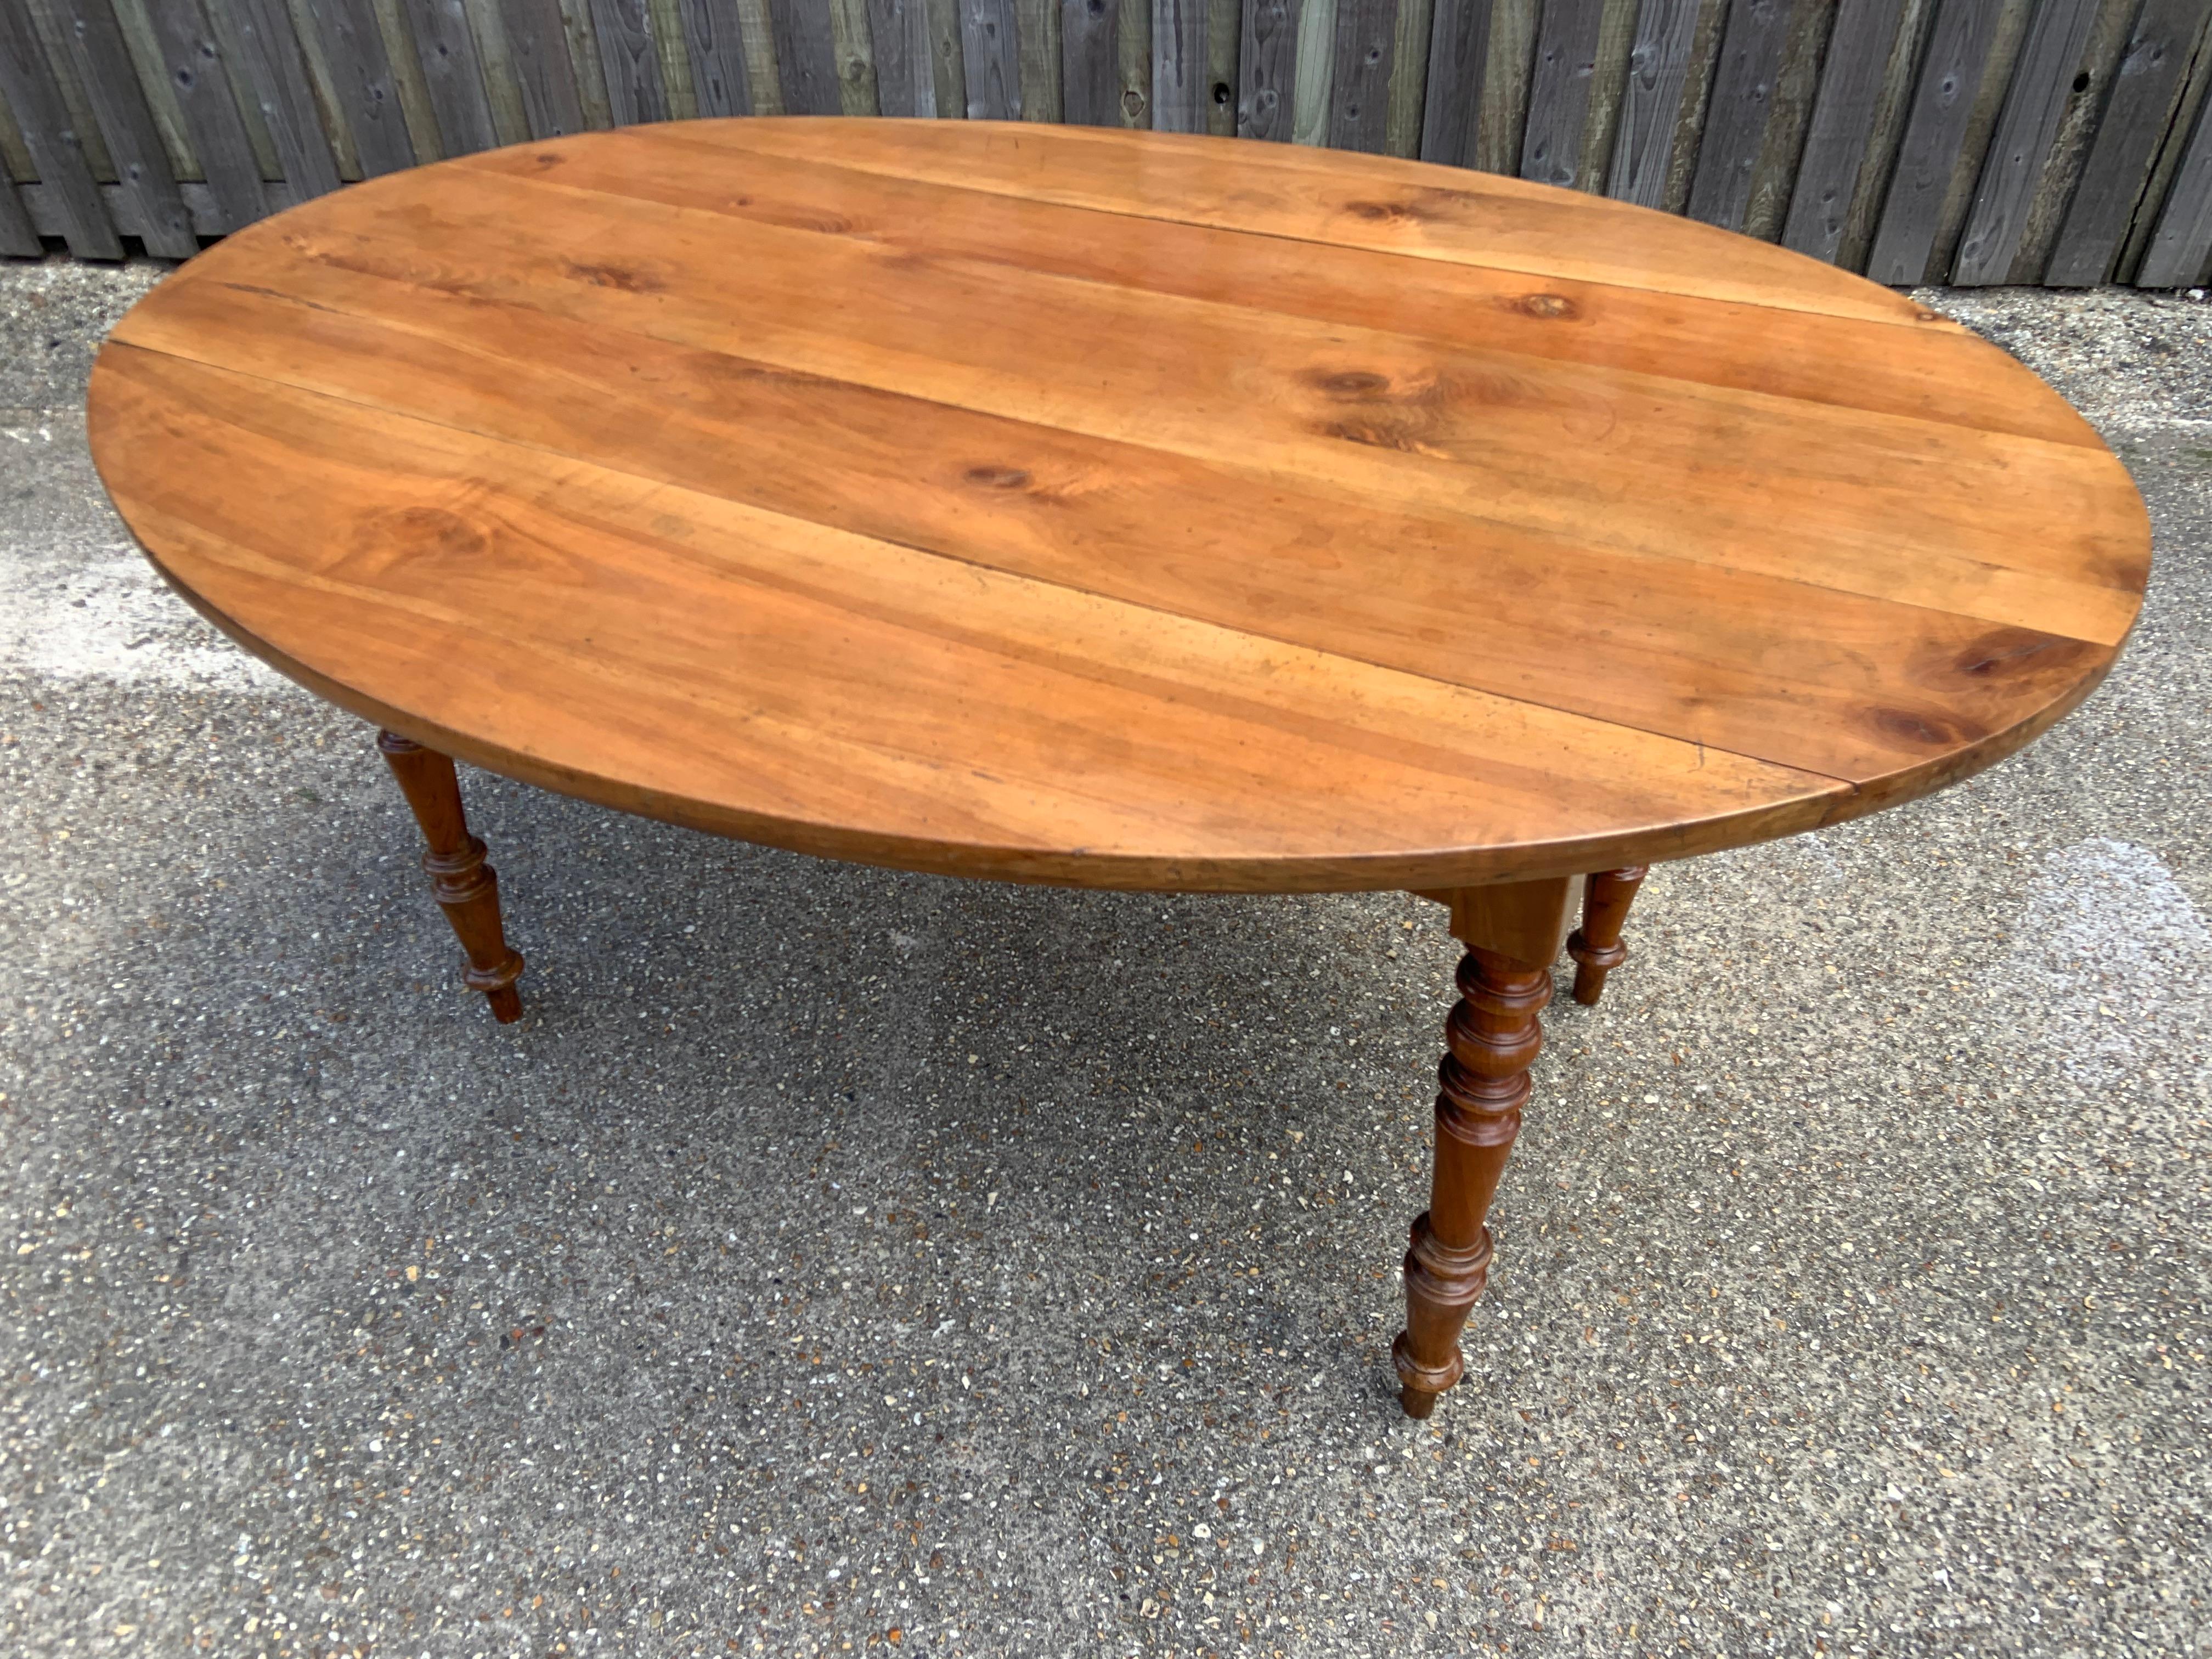 Antique Cherry Tapered Leg Oval Drop Leaf Table In Good Condition For Sale In Billingshurst, GB